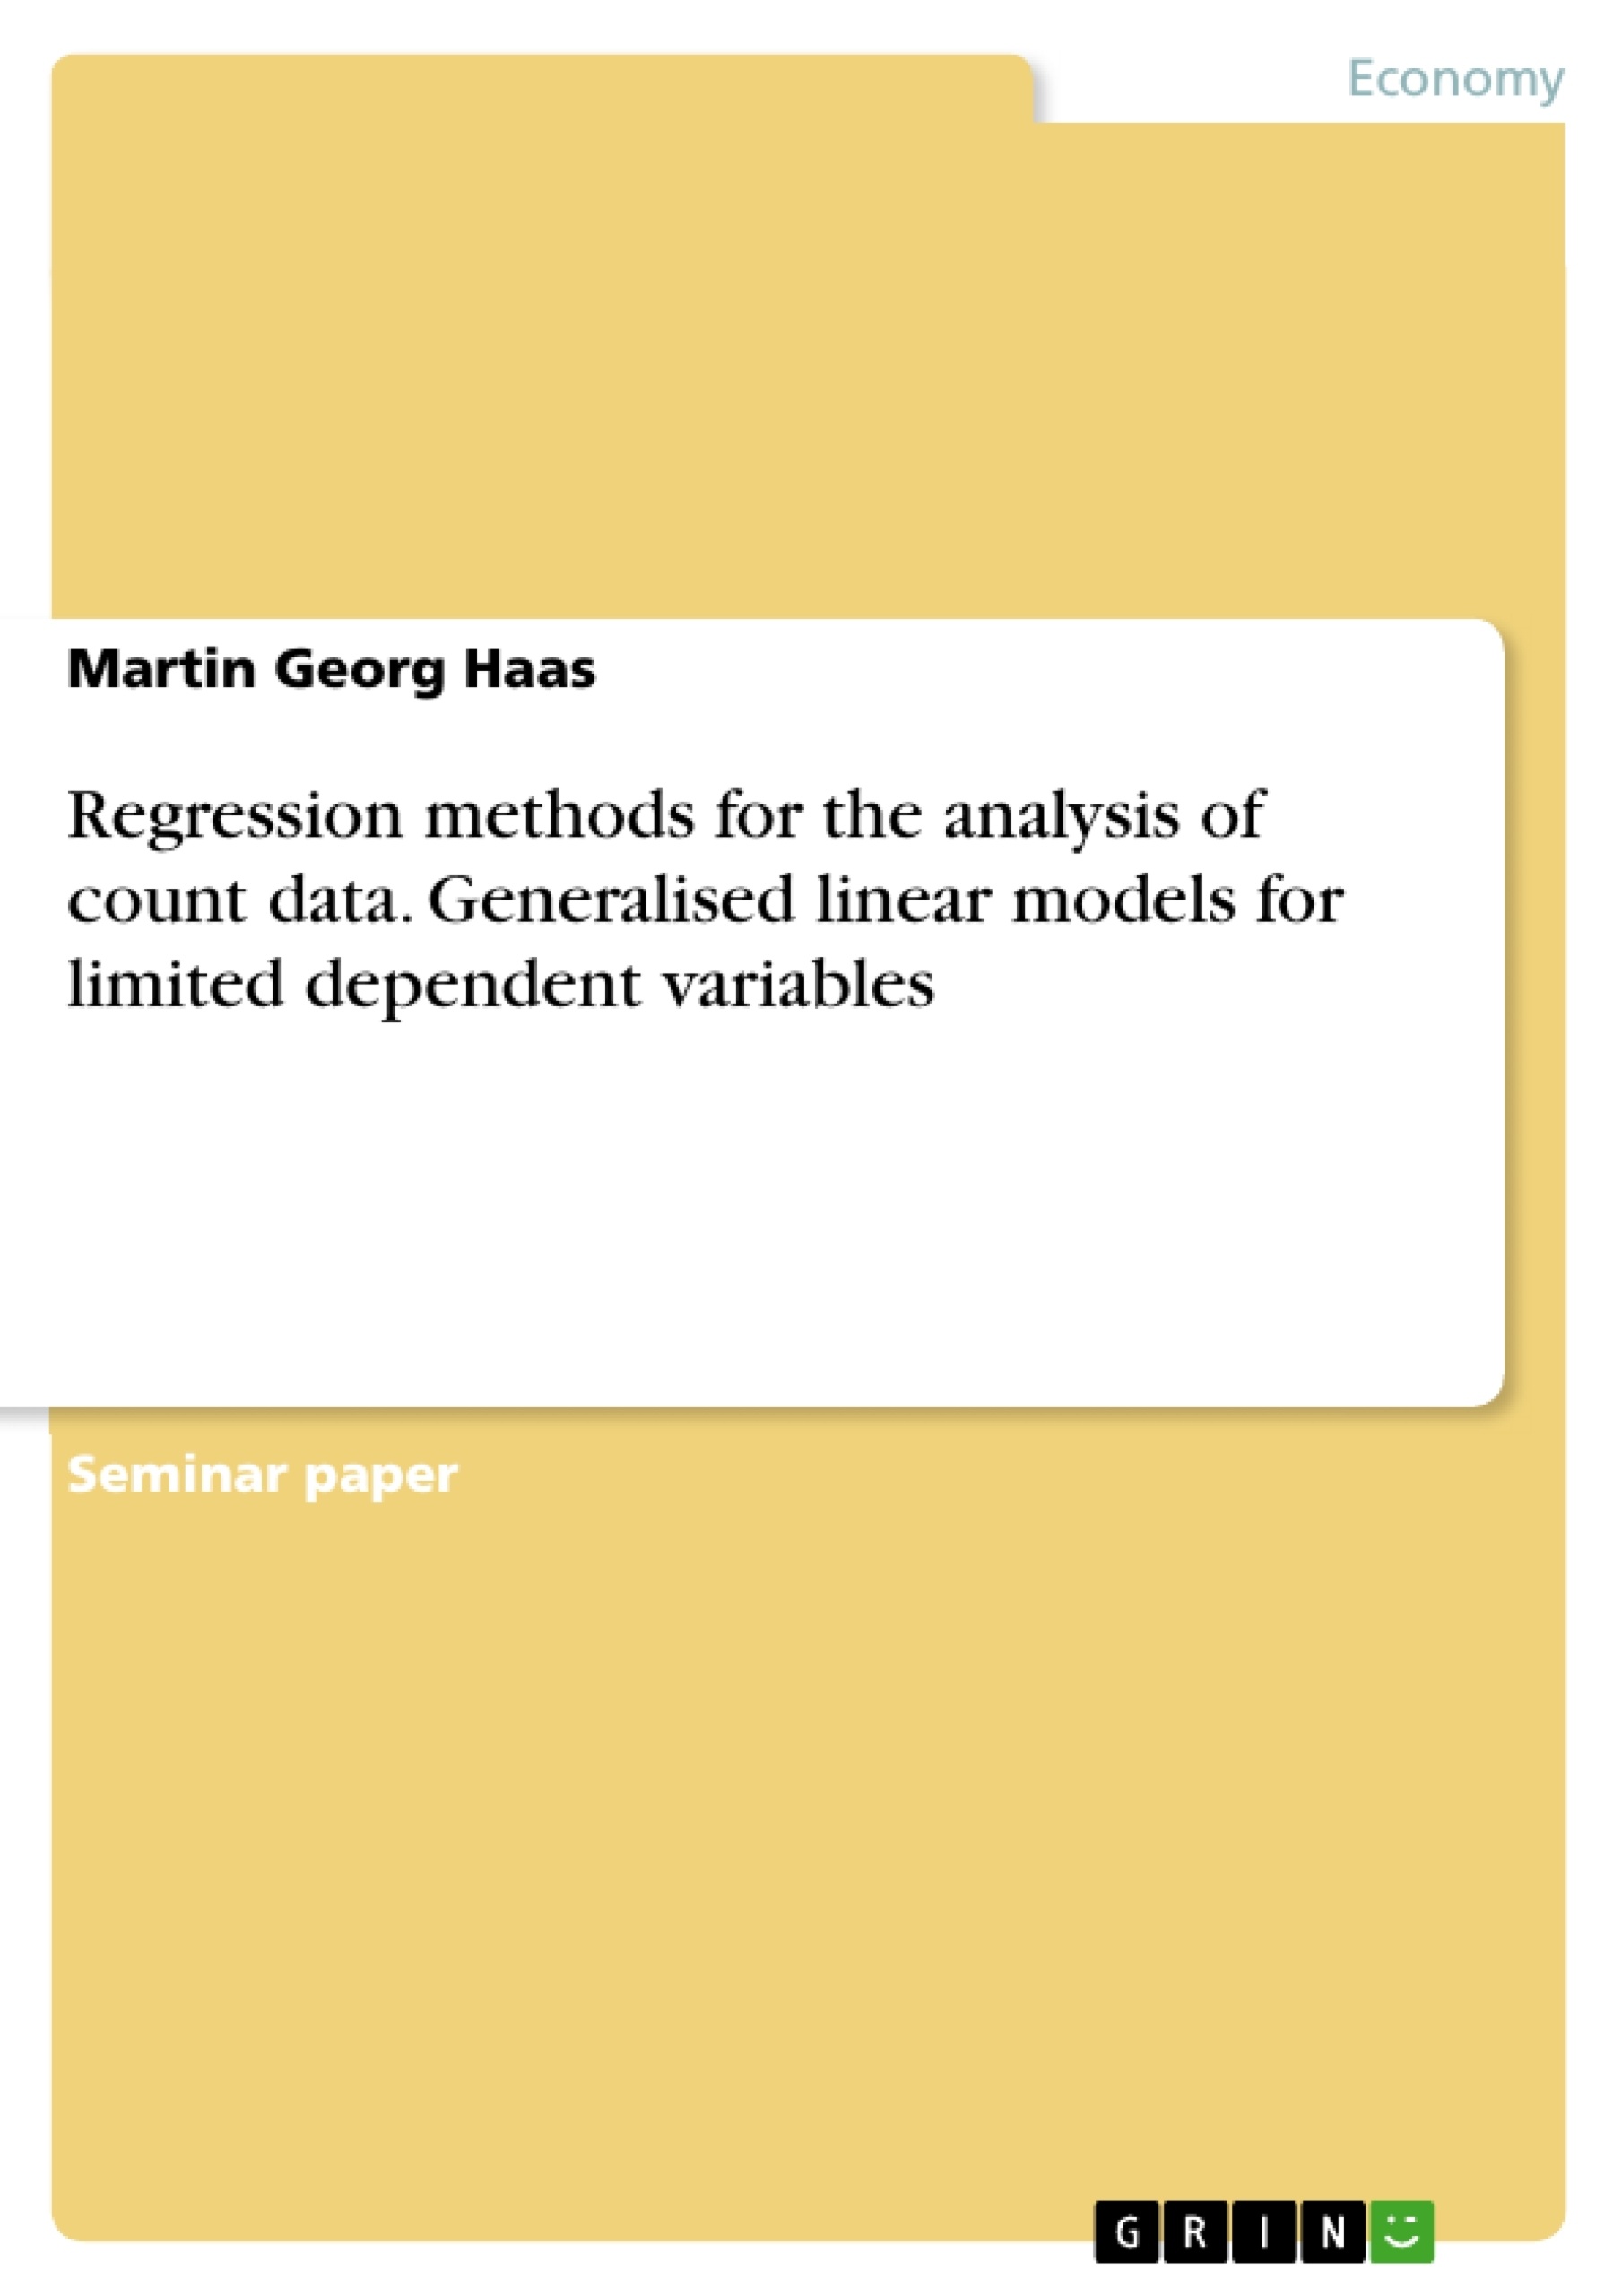 Title: Regression methods for the analysis of count data. Generalised linear models for limited dependent variables